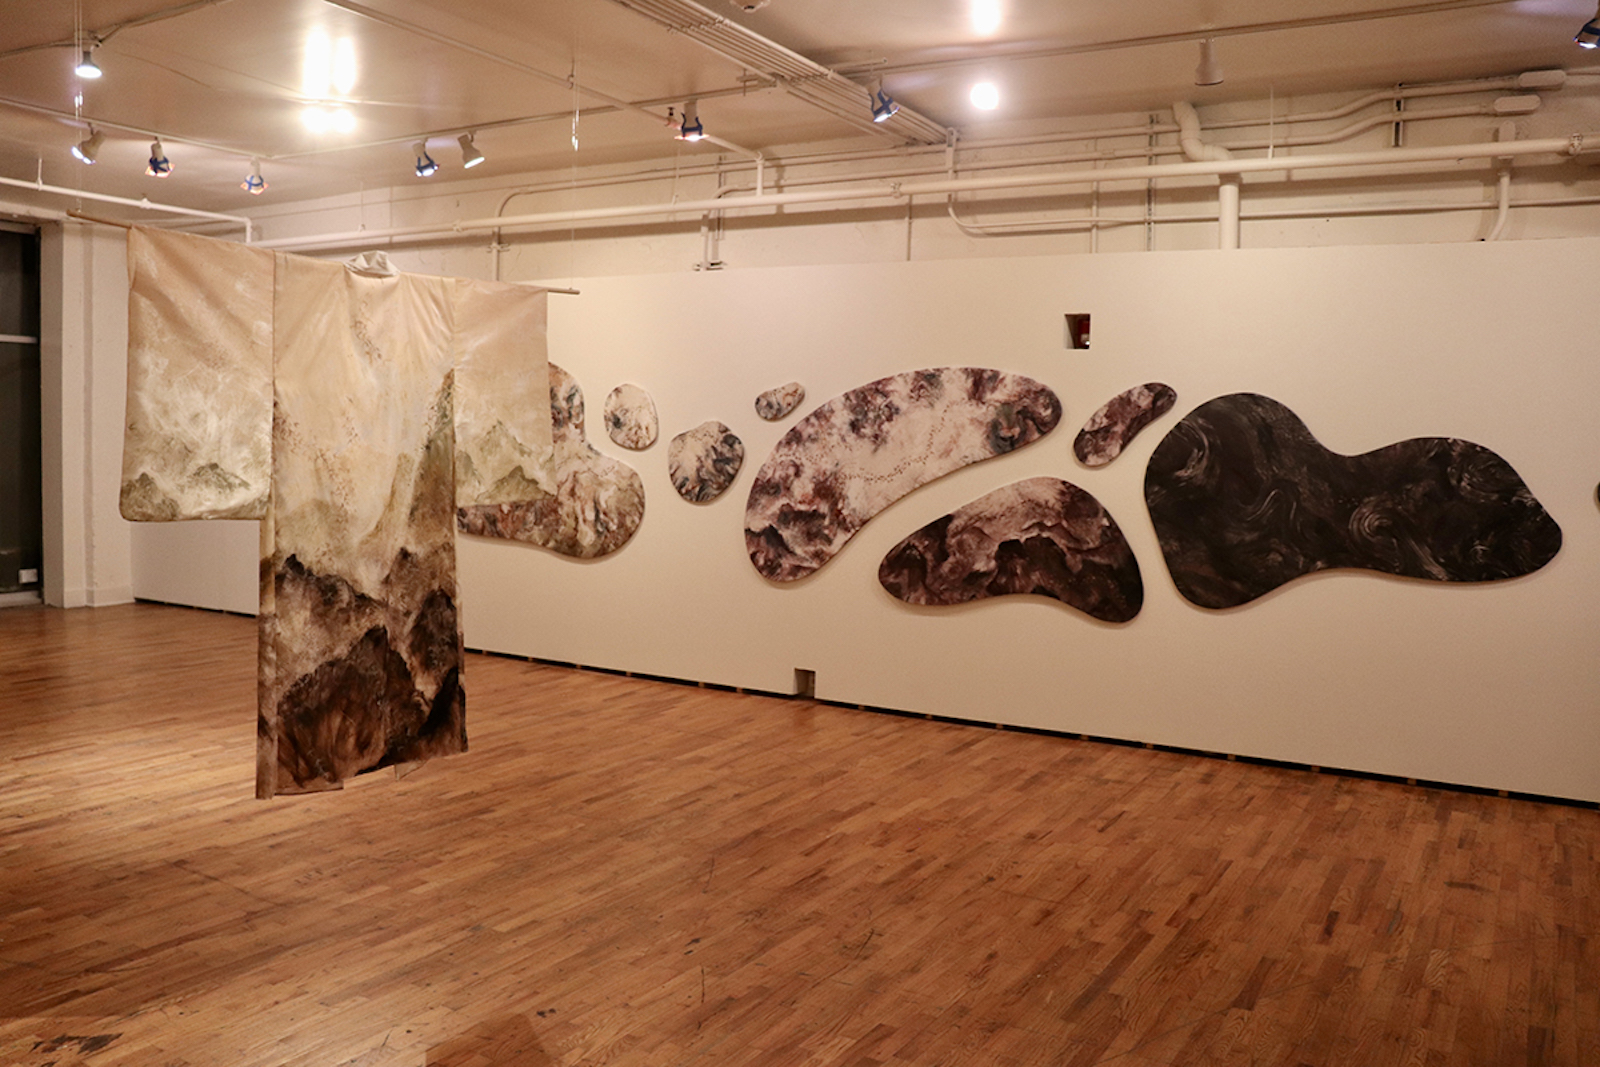 Large textured shapes on the wall, cloths hanging from the ceiling